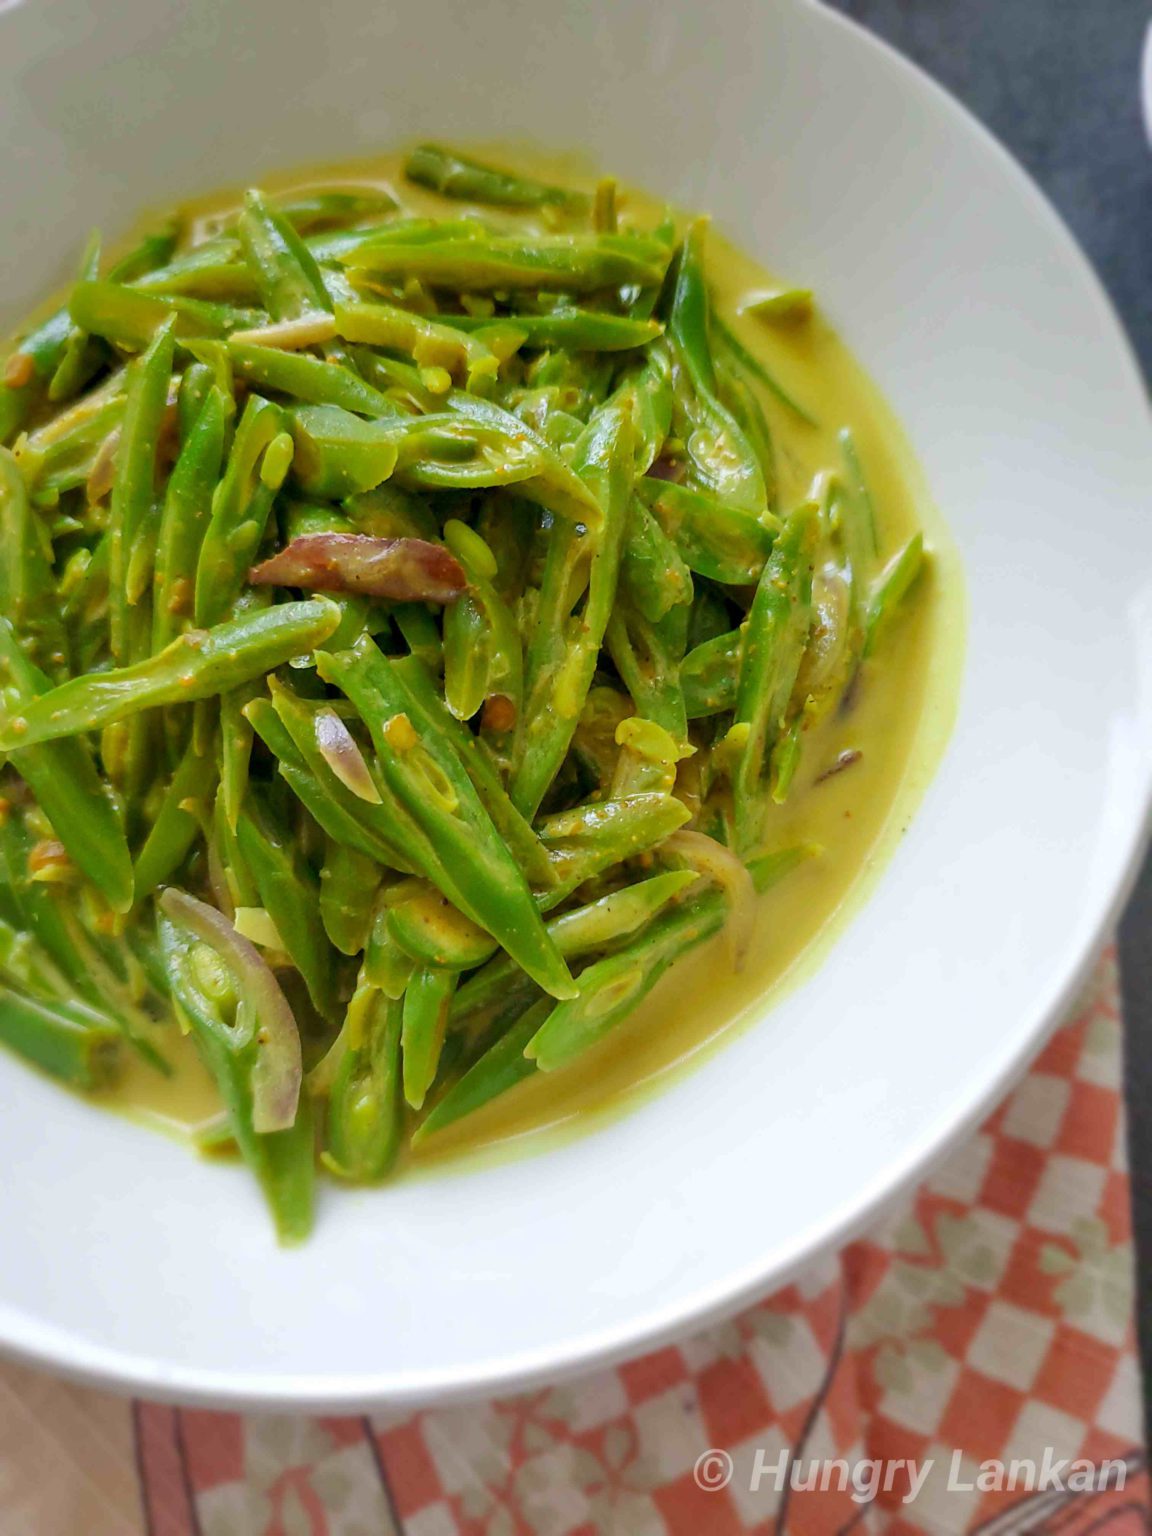 Vegan green bean curry with coconut milk - Hungry Lankan